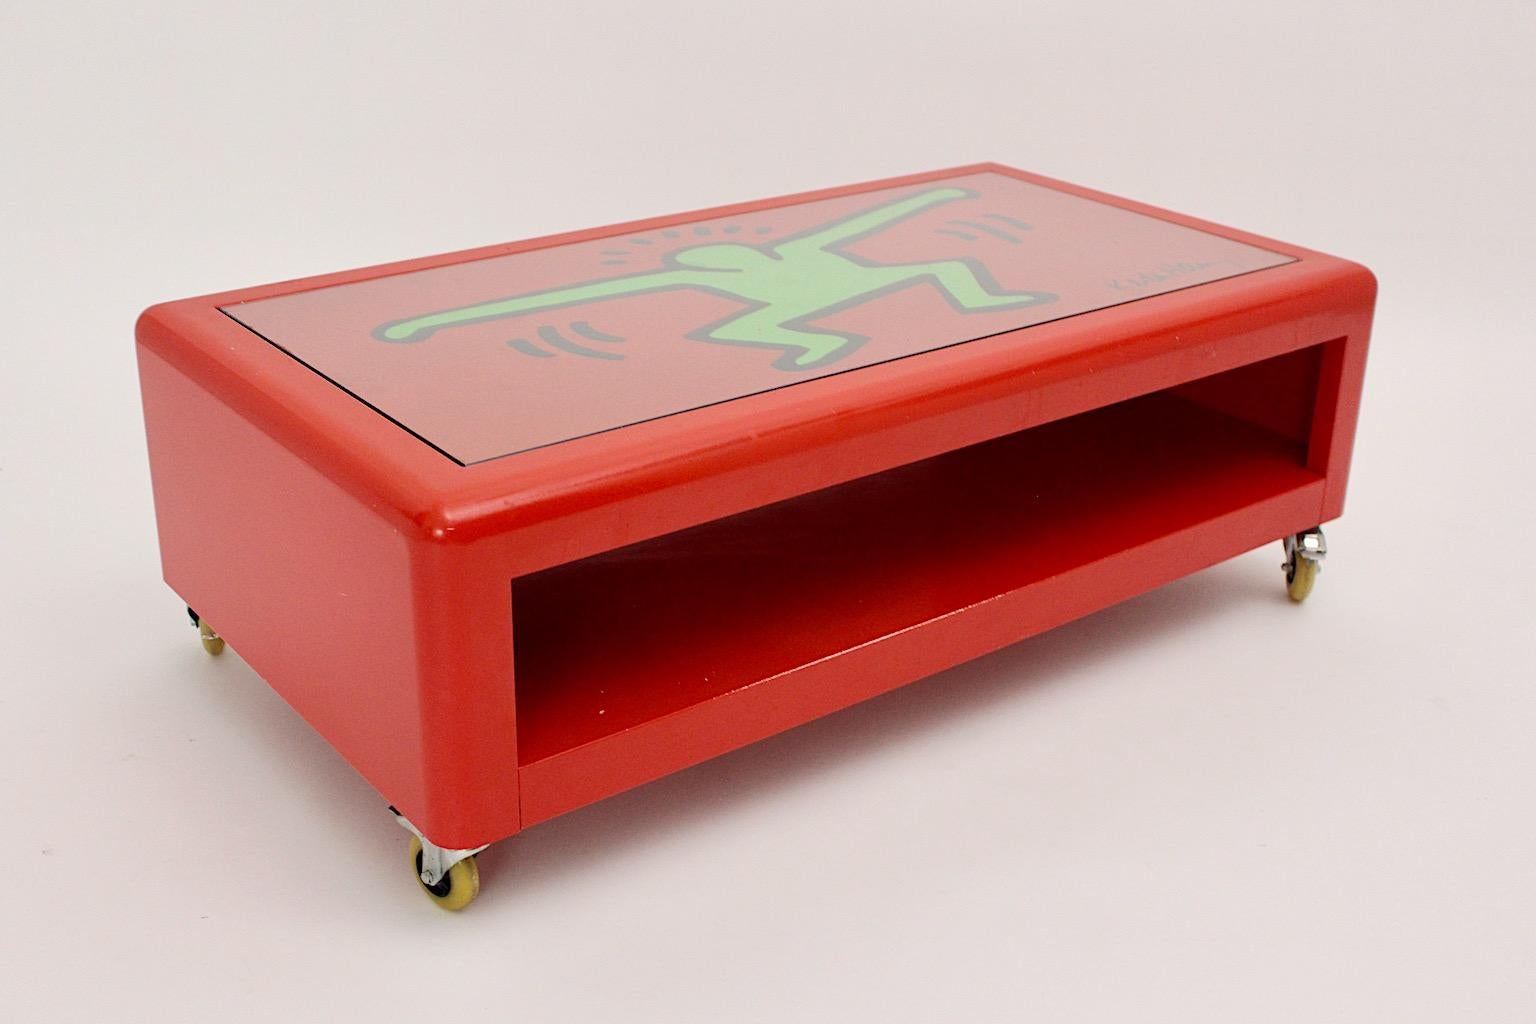 Pop Art Keith Haring ( after ) low sofa table of coffee table from metal in red and green color by Bretz circa 1998, Germany.
A Keith Haring low sofa table by Bretz from red lacquered metal with wheels and two tiers, sweet boy graffiti motif in